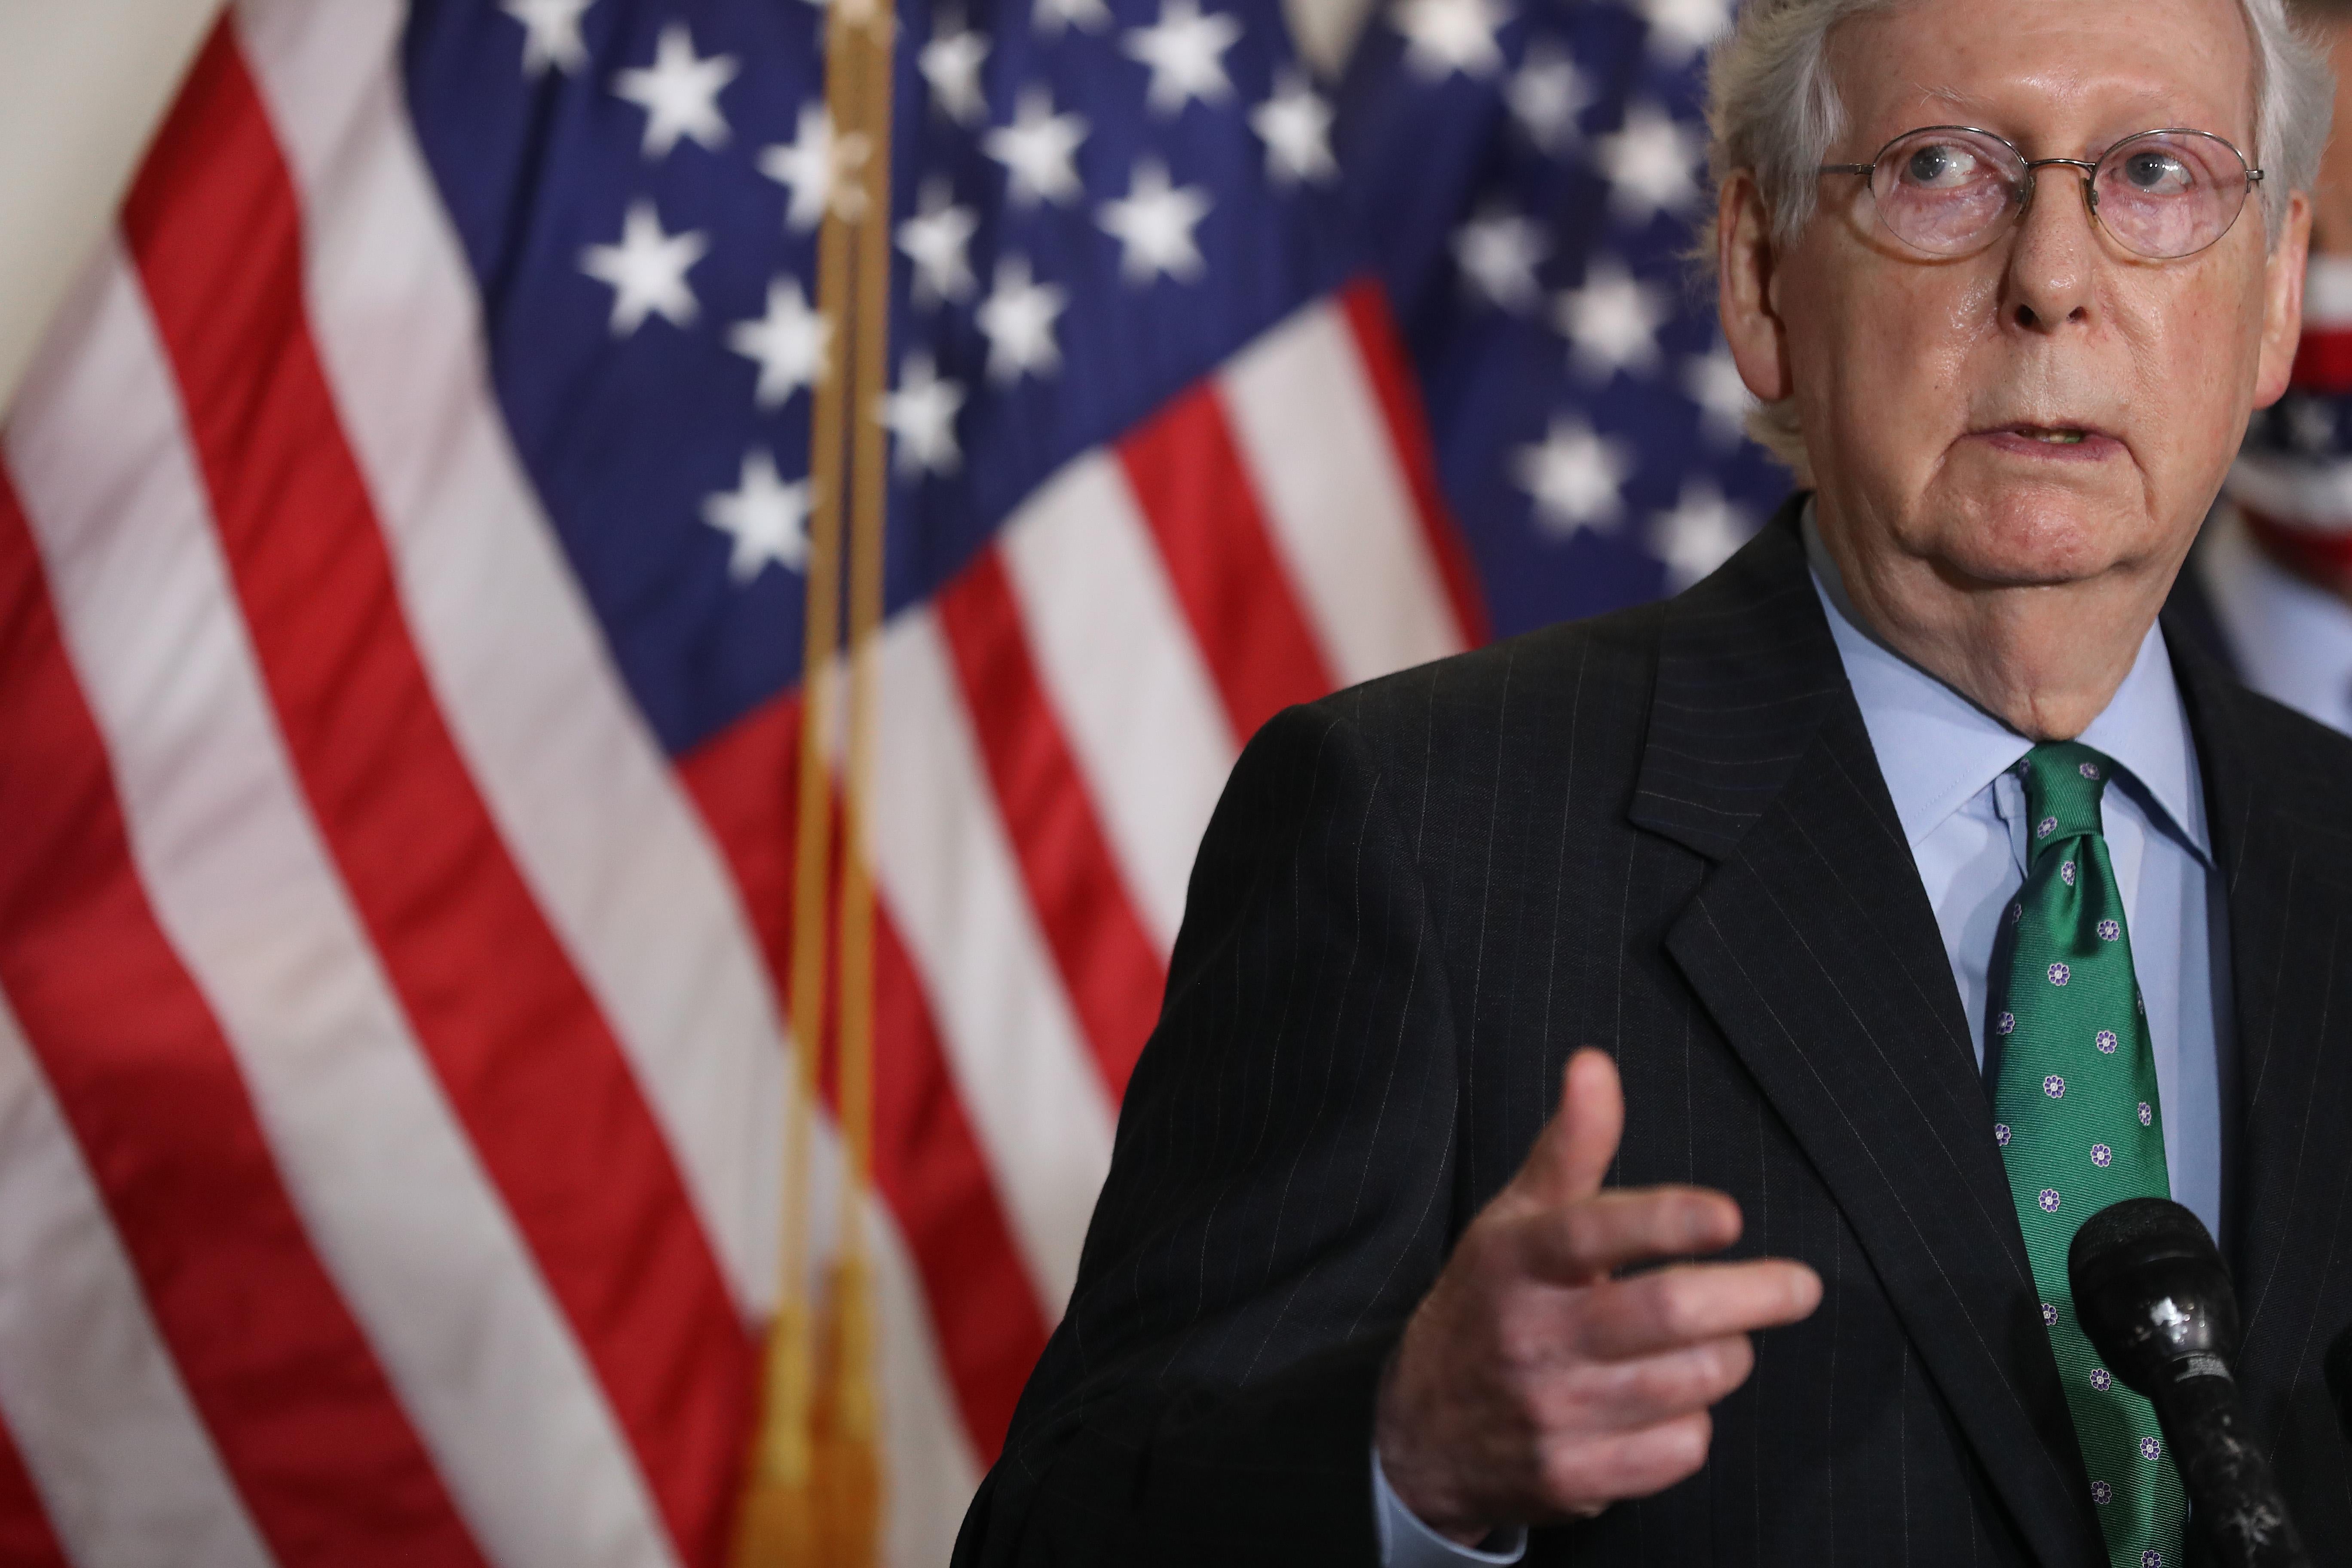 McConnell, standing at a podium, speaks to reporters on Capitol Hill on Sept. 30